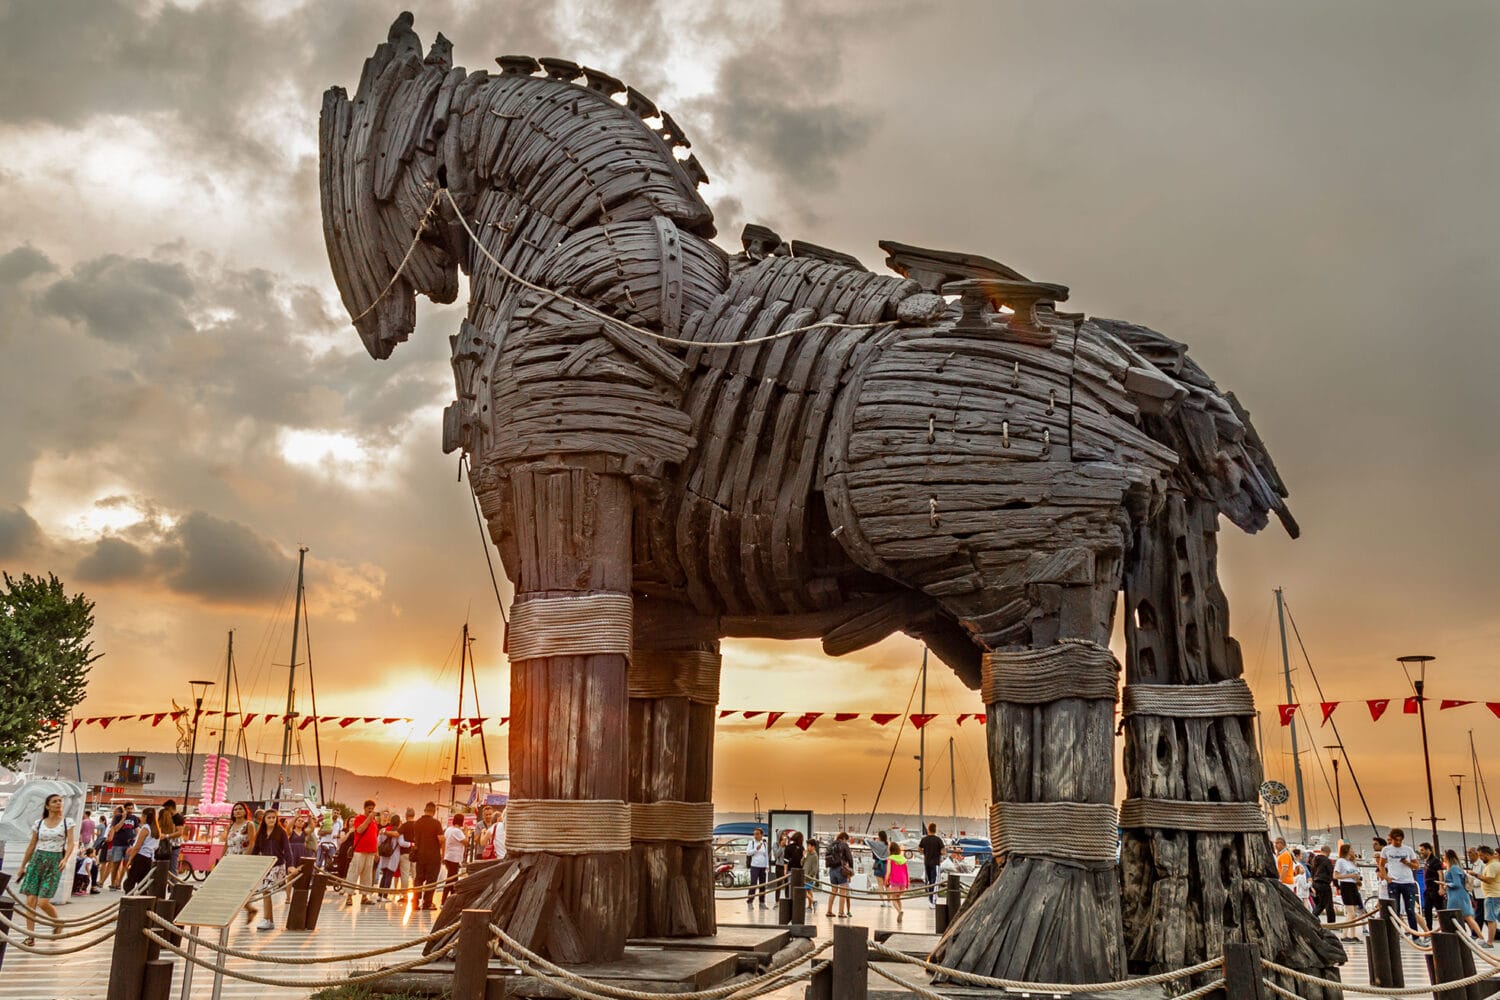 Tour Photos Trojan Horse from the Movie Troy